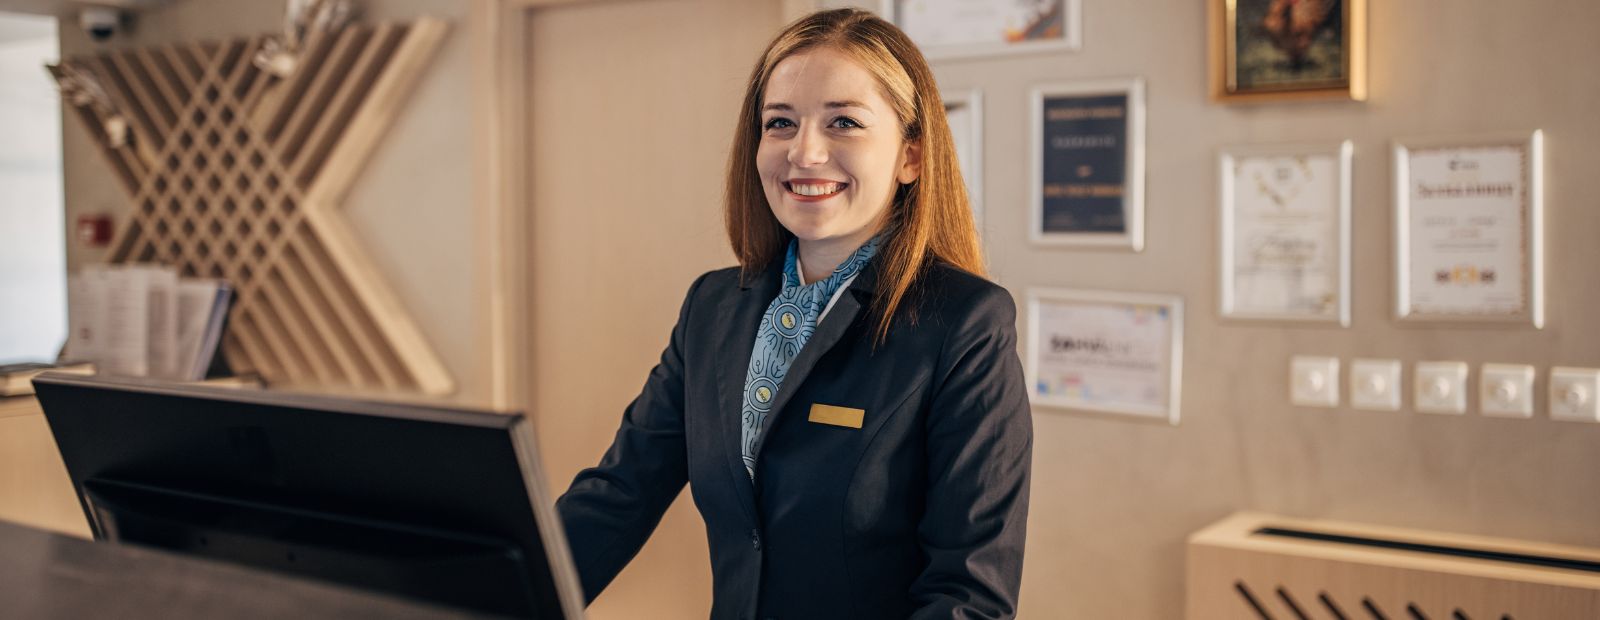 A concierge smiling at a hotel front desk.